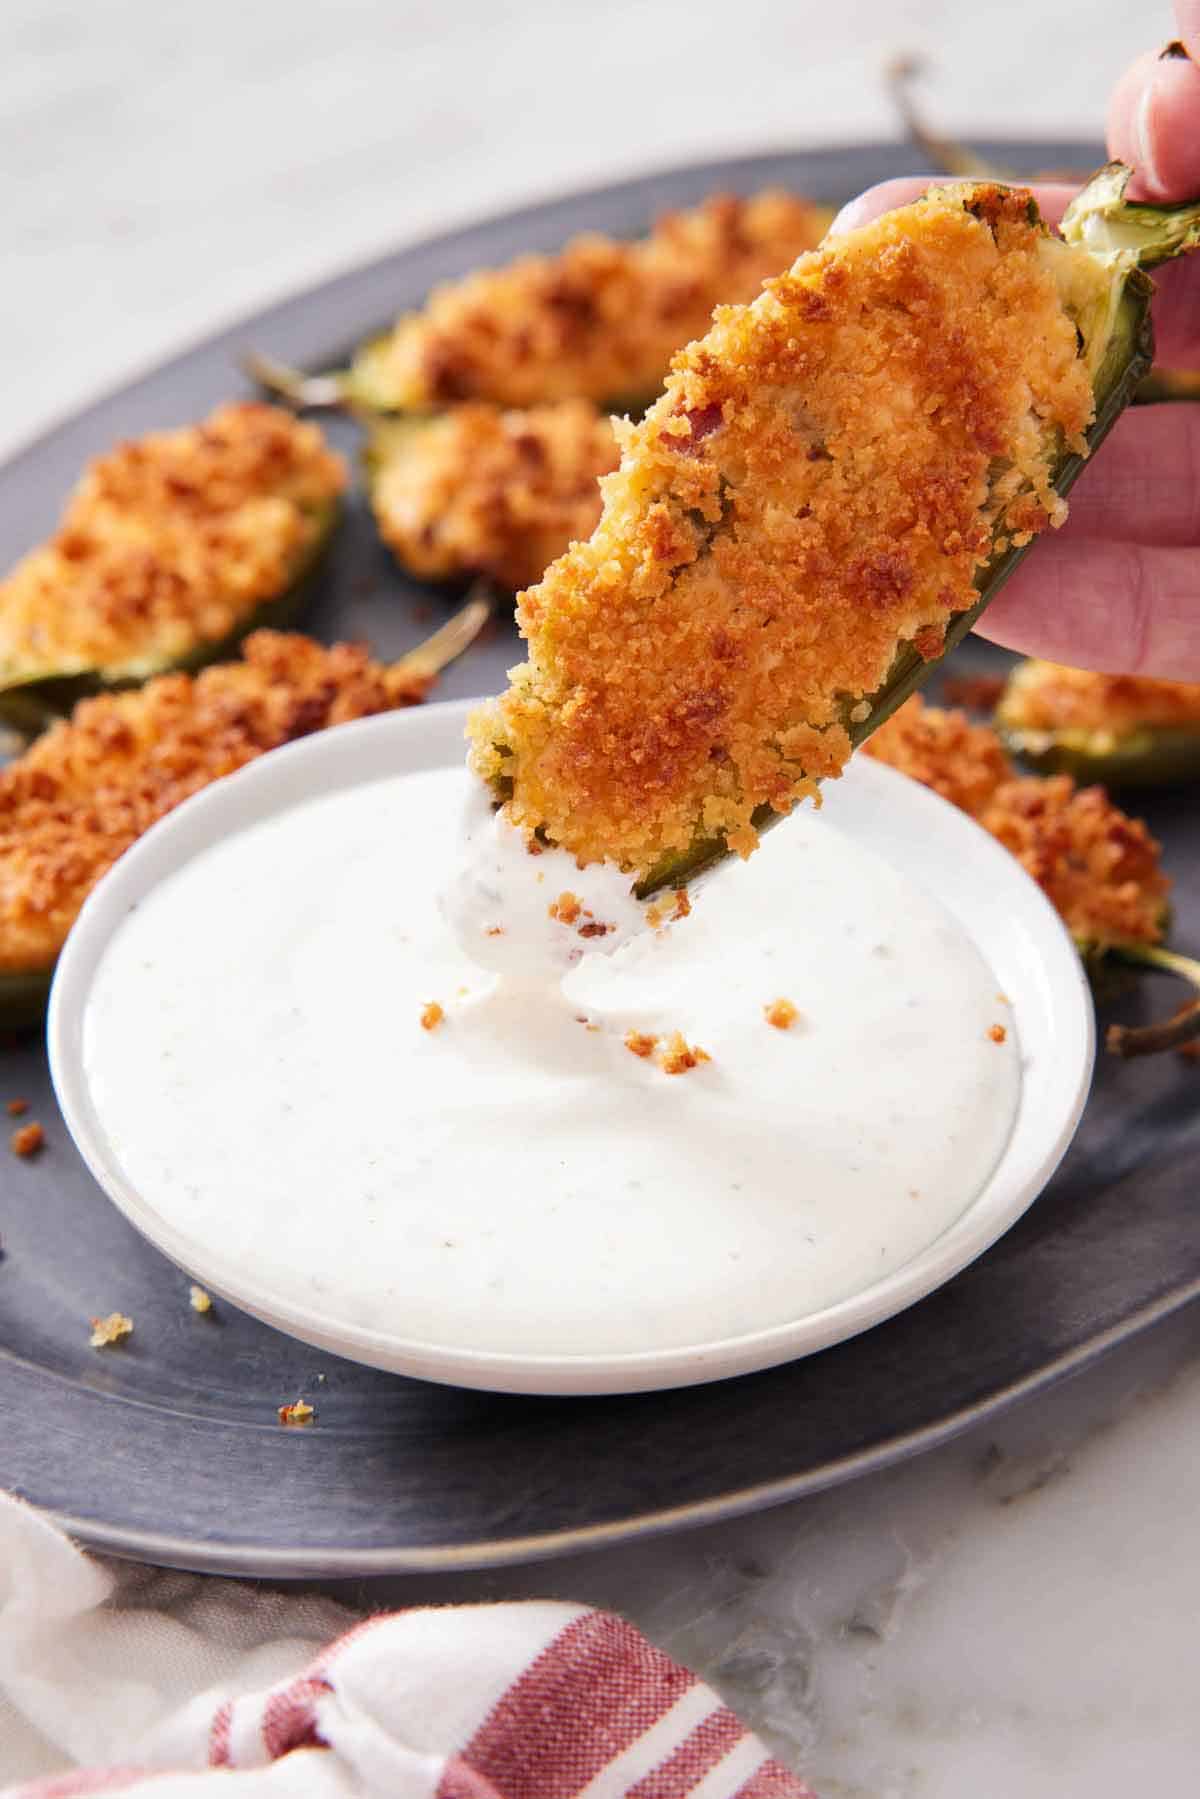 A jalapeno popper dipped into a creamy dipping sauce with more jalapeno poppers on the platter.